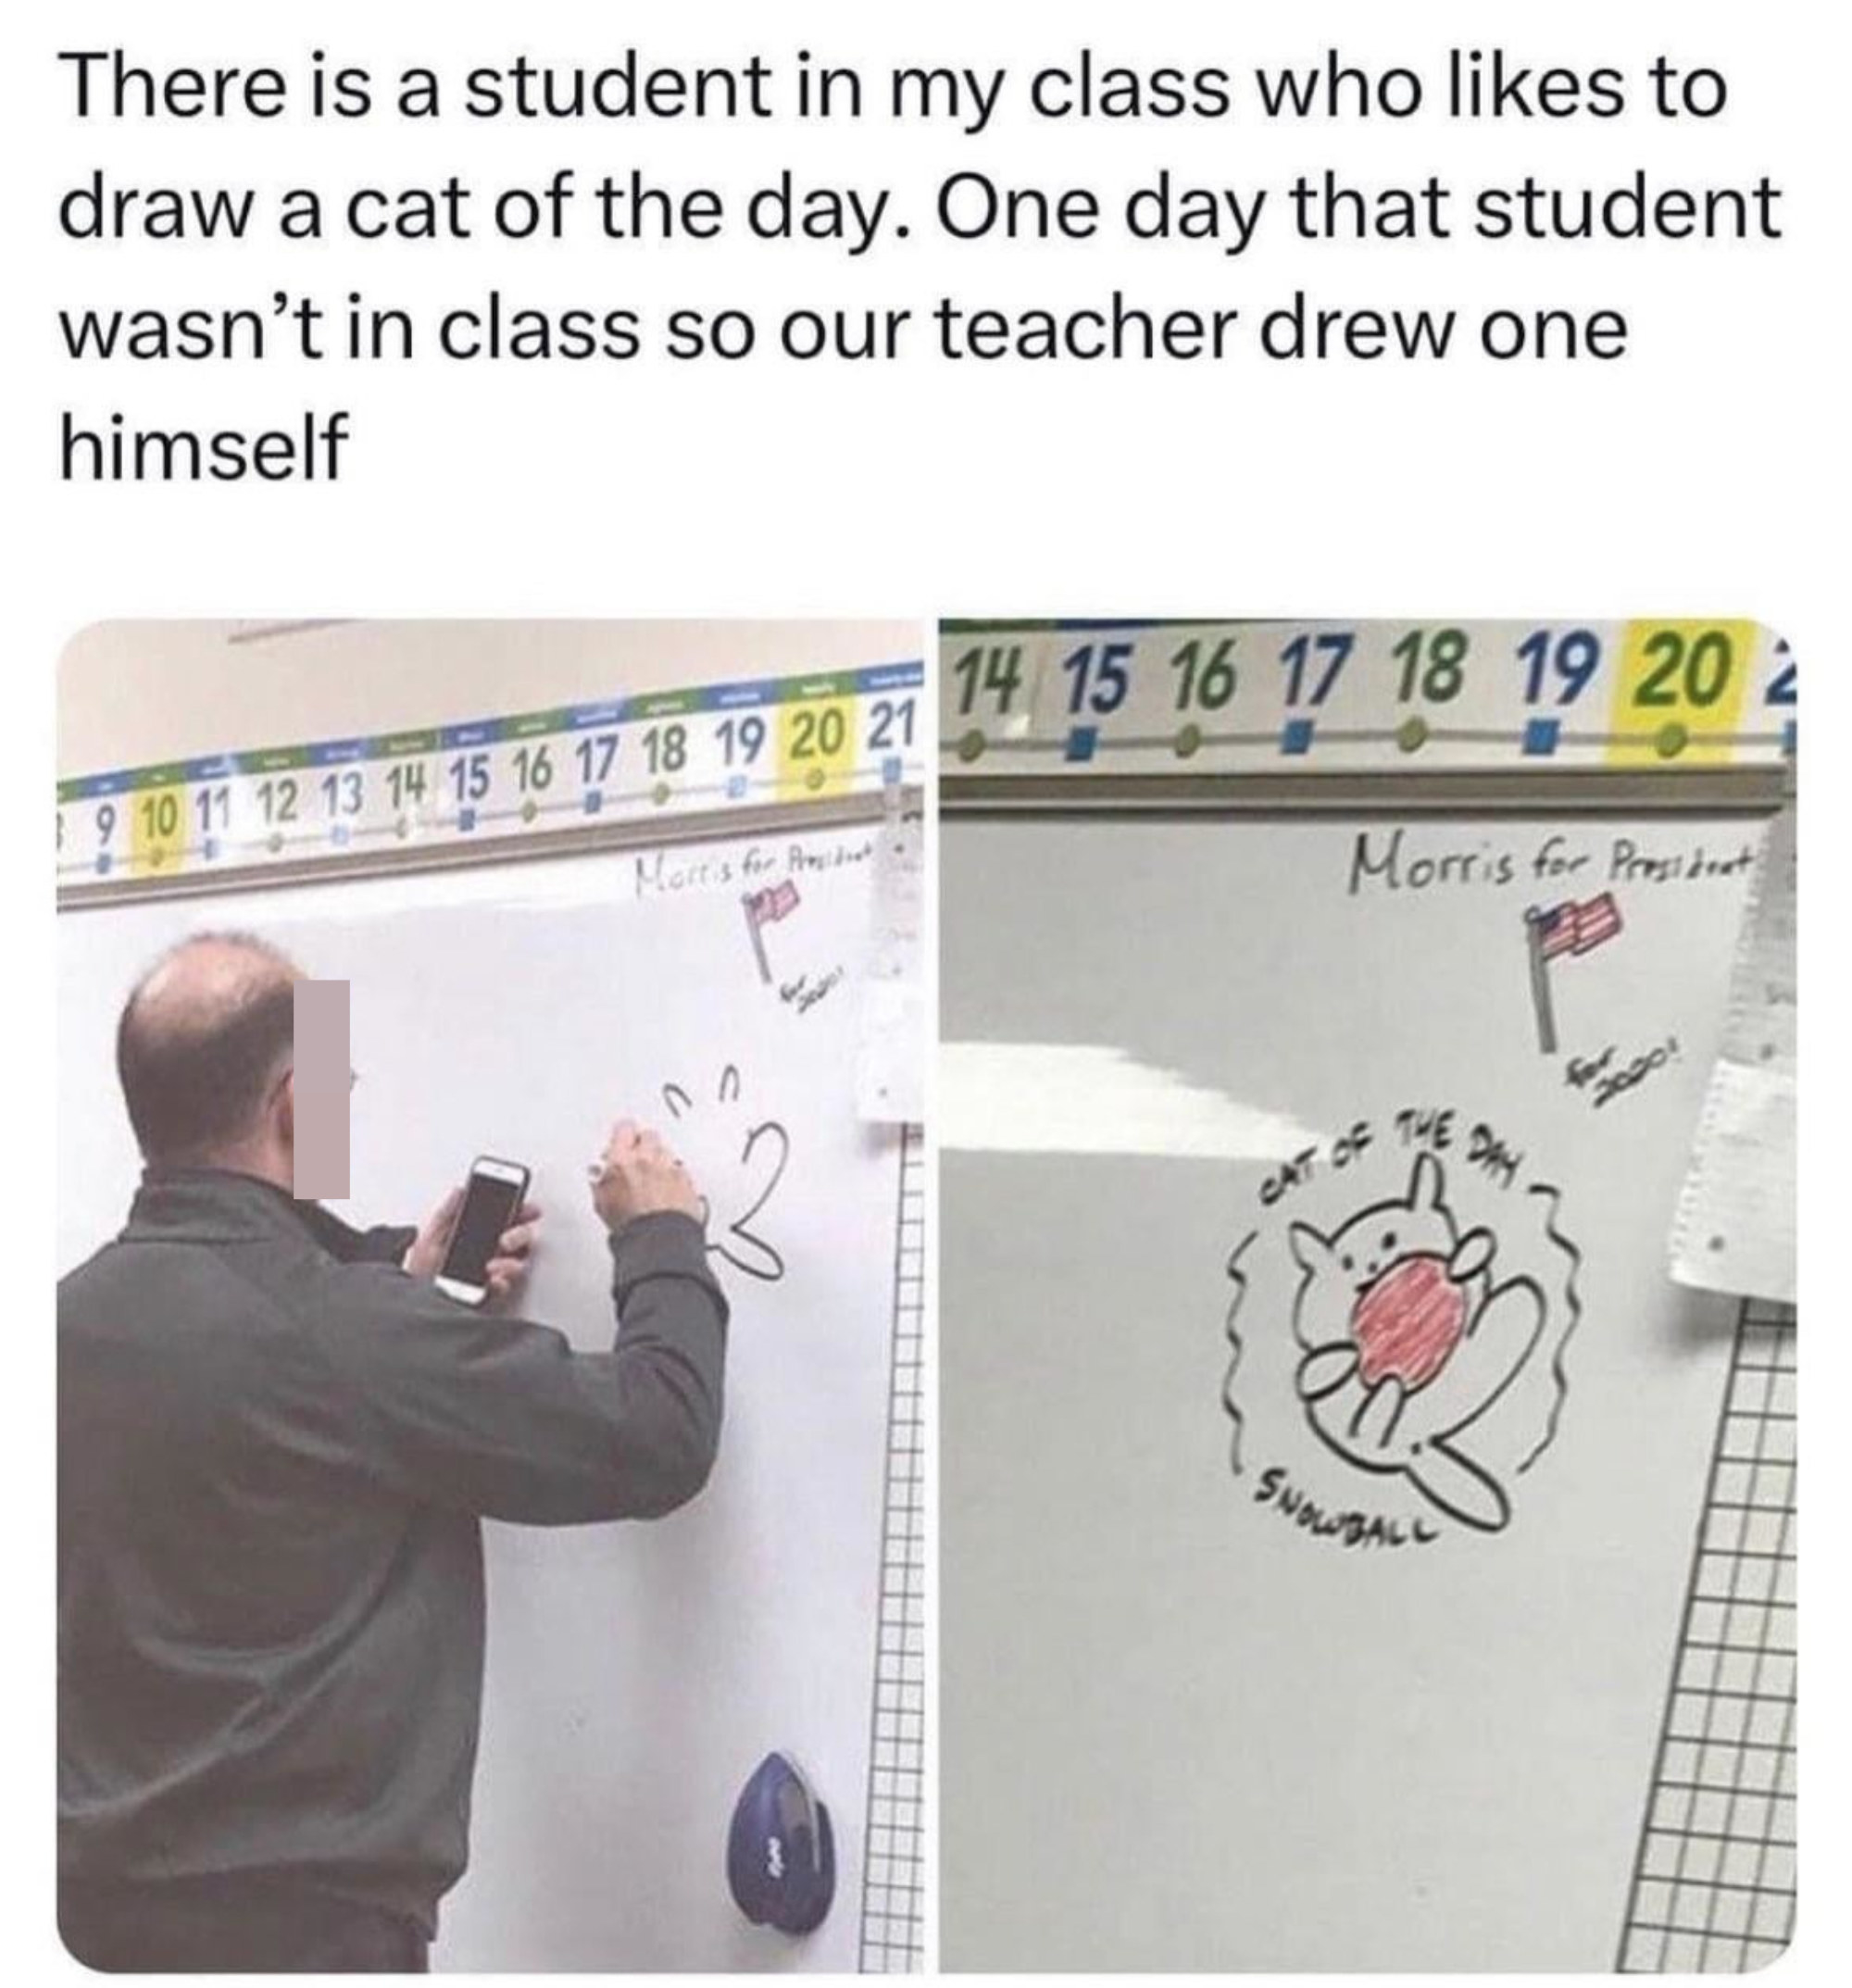 When student who draws a &quot;cat of the day&quot; every day in class was absent one day, the teacher drew his own &quot;cat of the day,&quot; &quot;Snowball,&quot; on the whiteboard